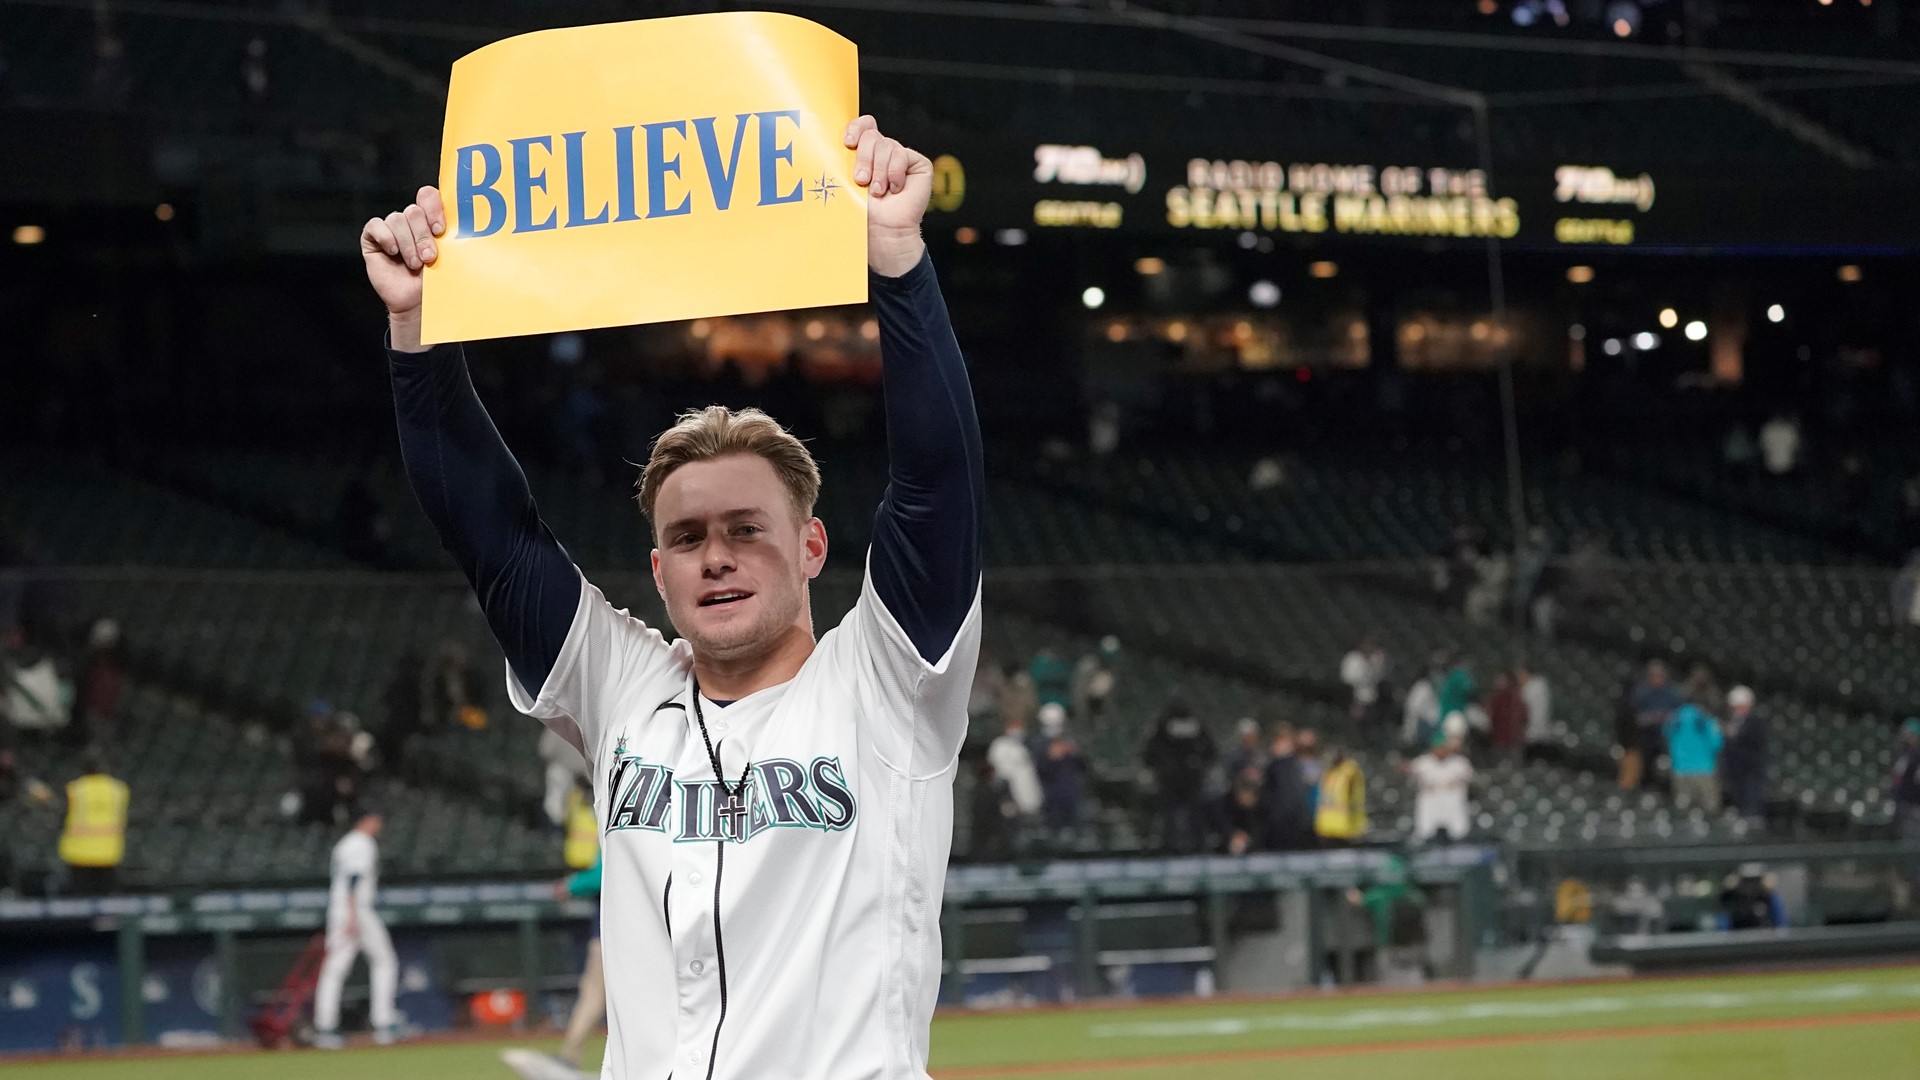 The Mariners being on the cusp of the playoffs has merchandise flying off the shelves and tickets disappearing fast